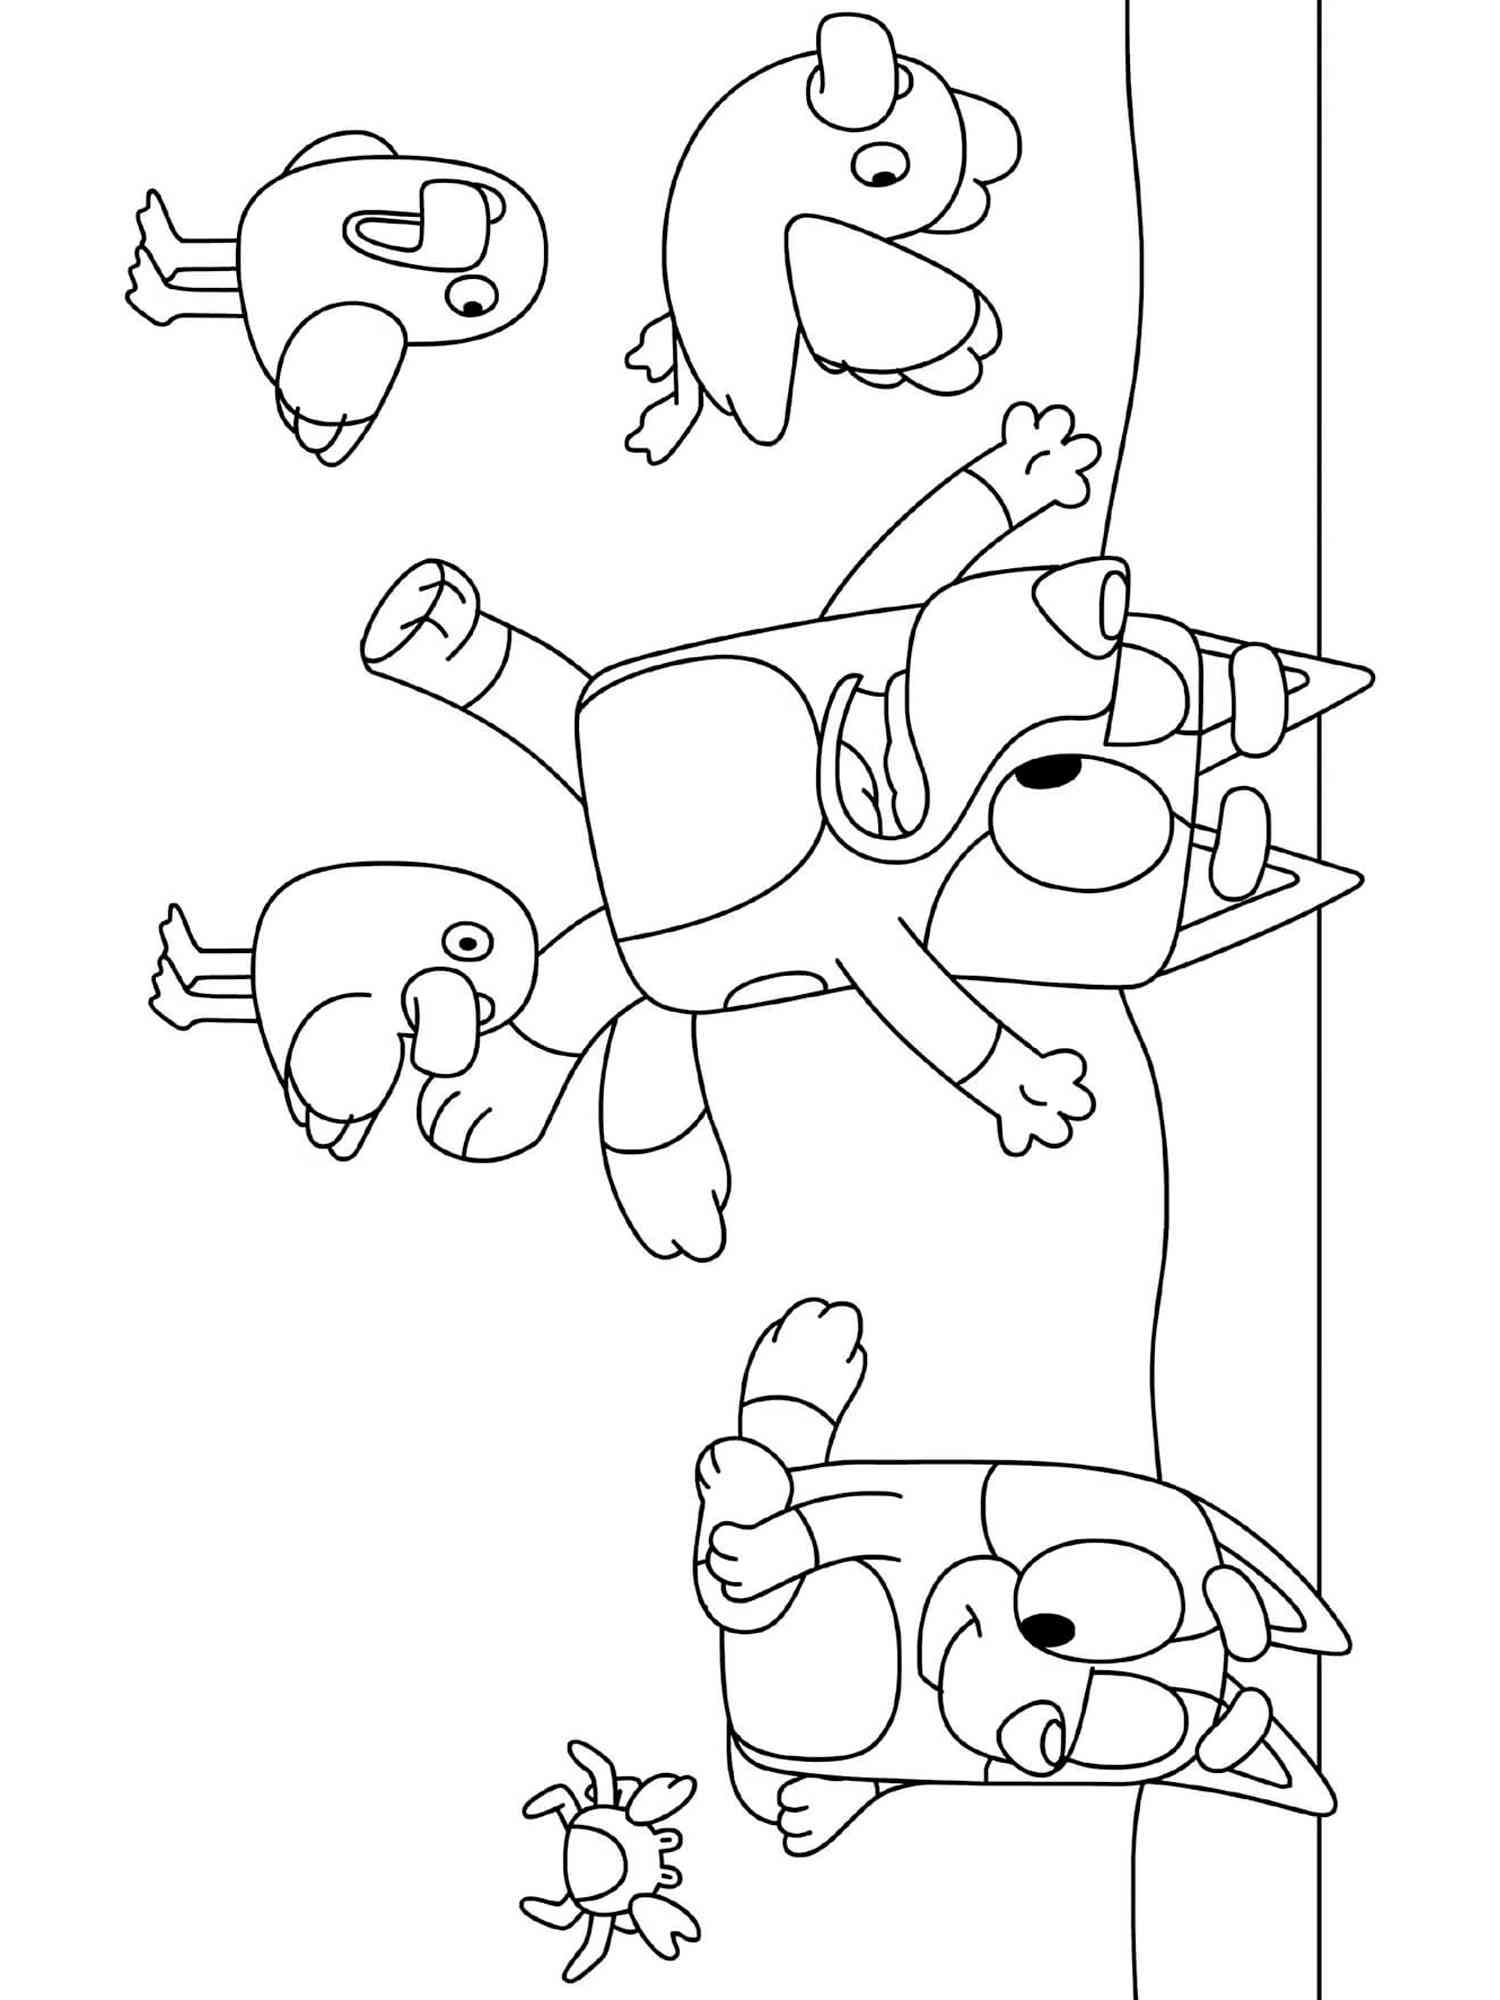 Bluey 25 coloring page